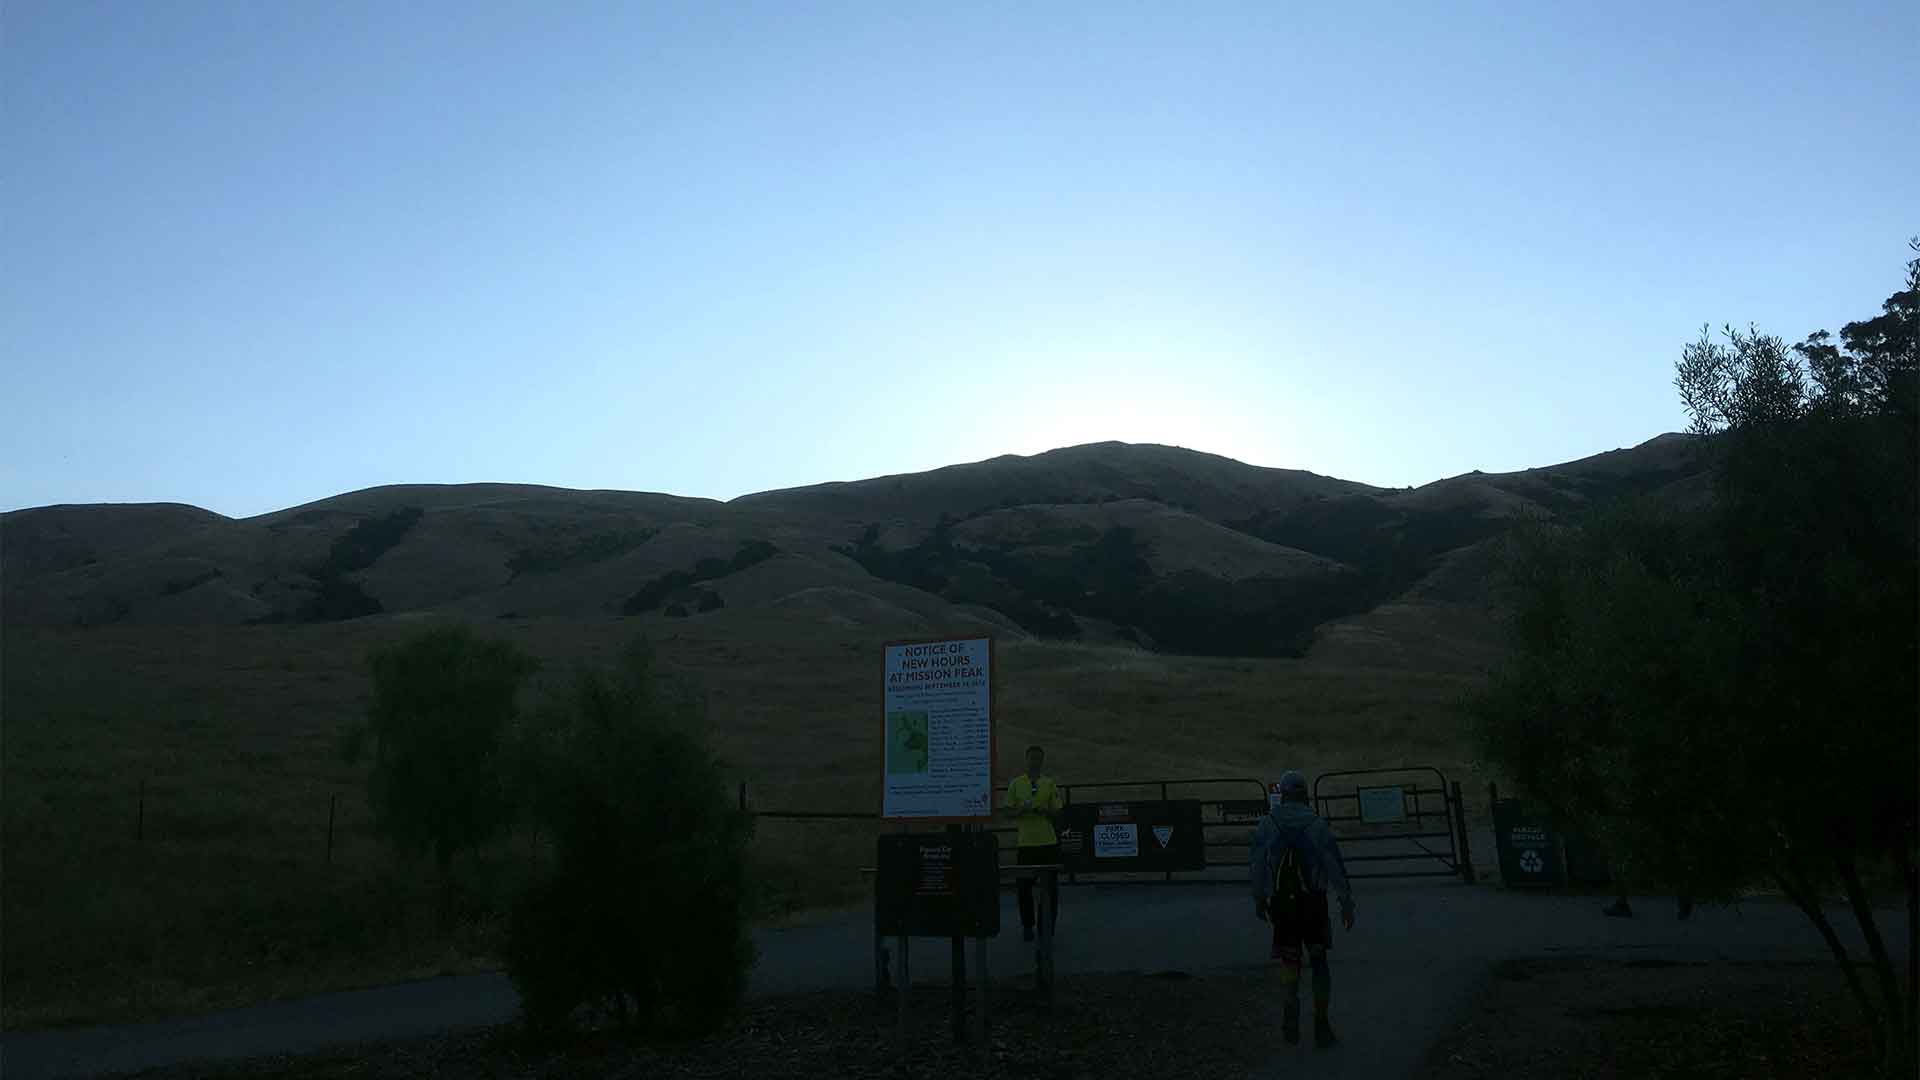 Photos from To Mission Peak 0